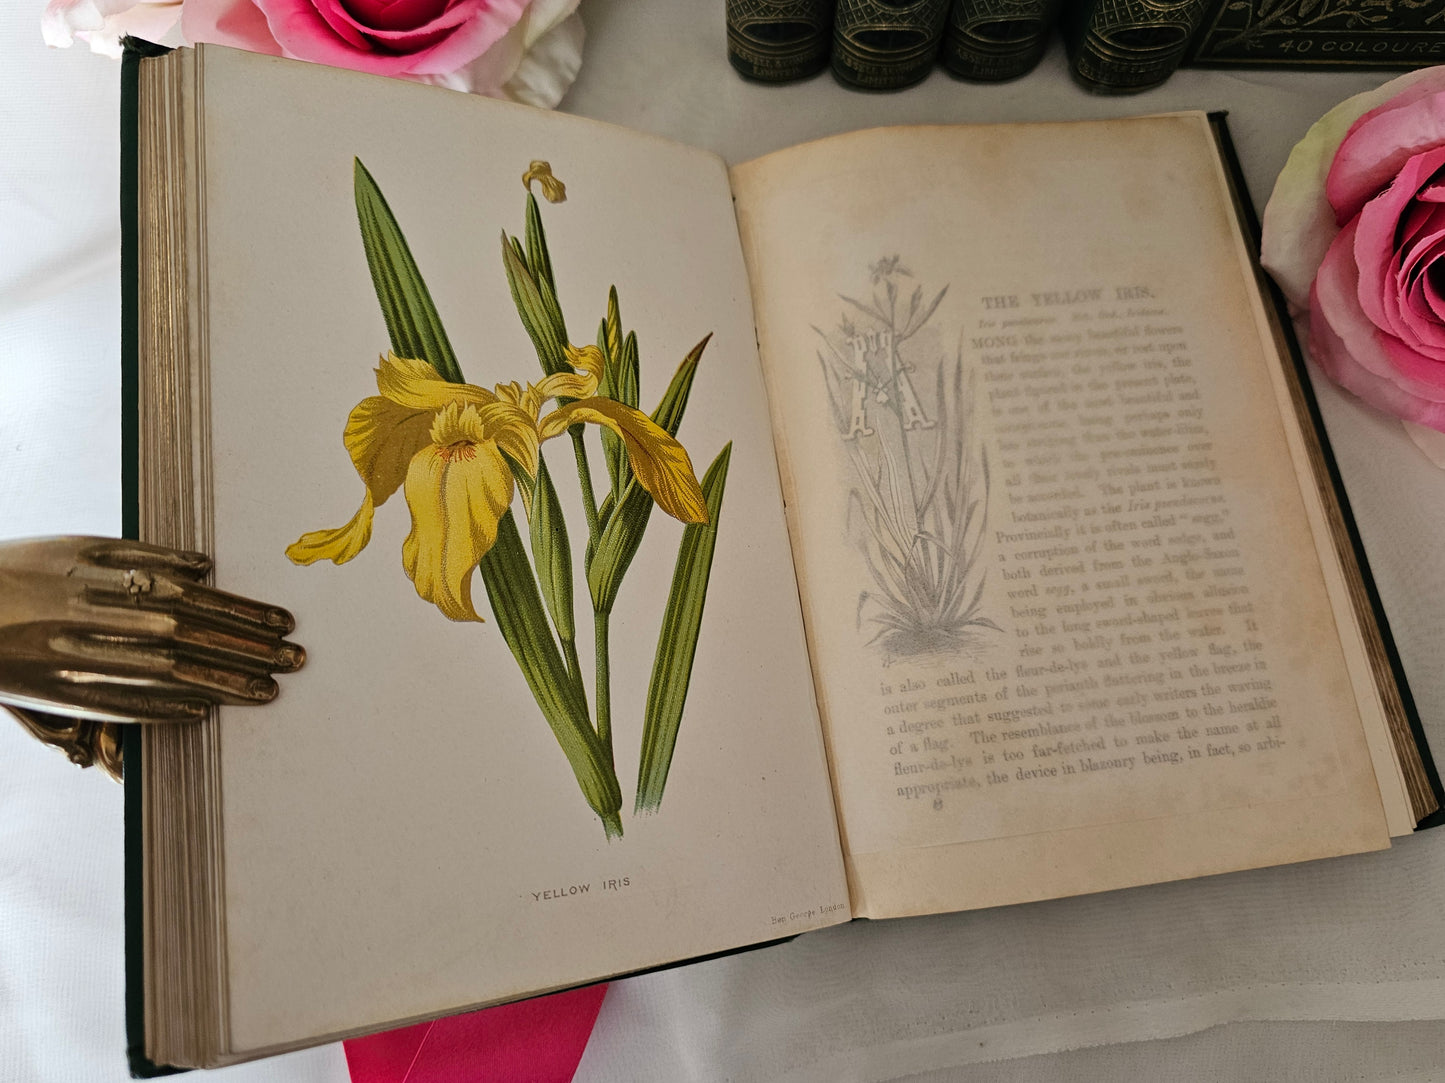 1880s Complete Set in Five Volumes of Familiar Wild Flowers by Edward Hulme / Stunning Victorian Antique Series / Richly Colour Illustrated